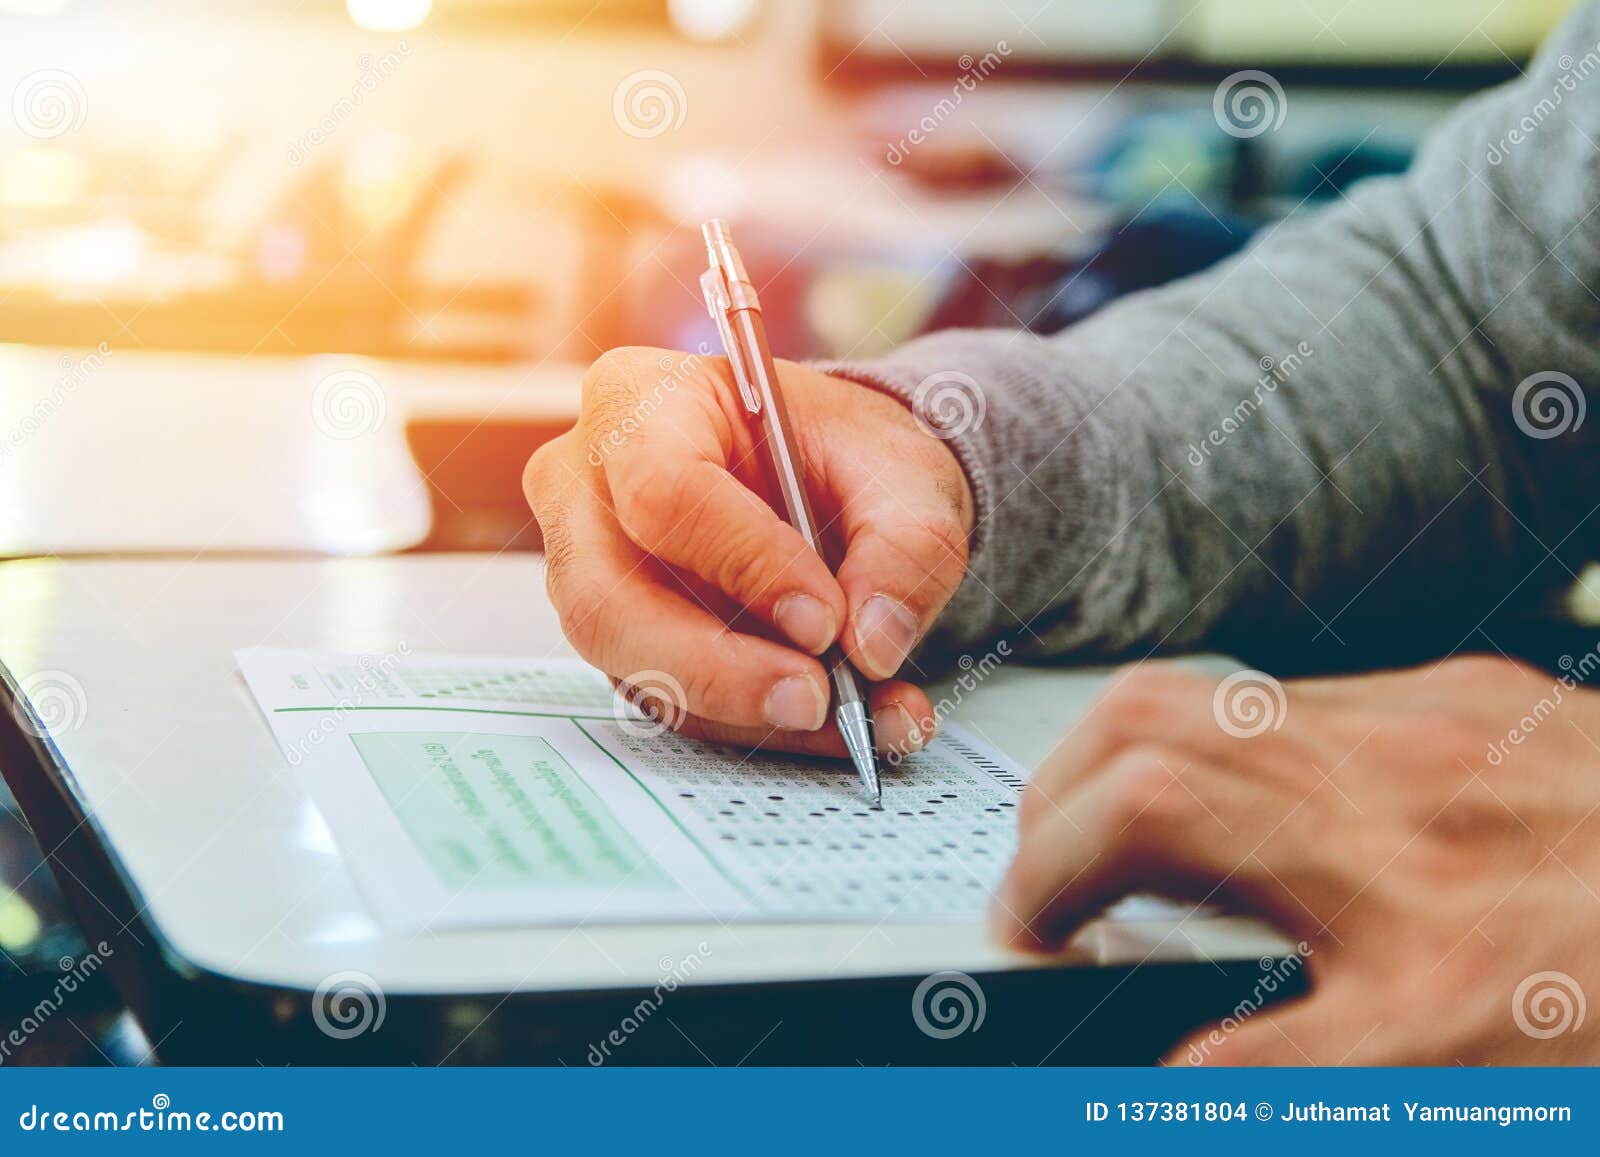 close up , high school male student holding pencil exams writing in classroom for education test ,copy space for your text.